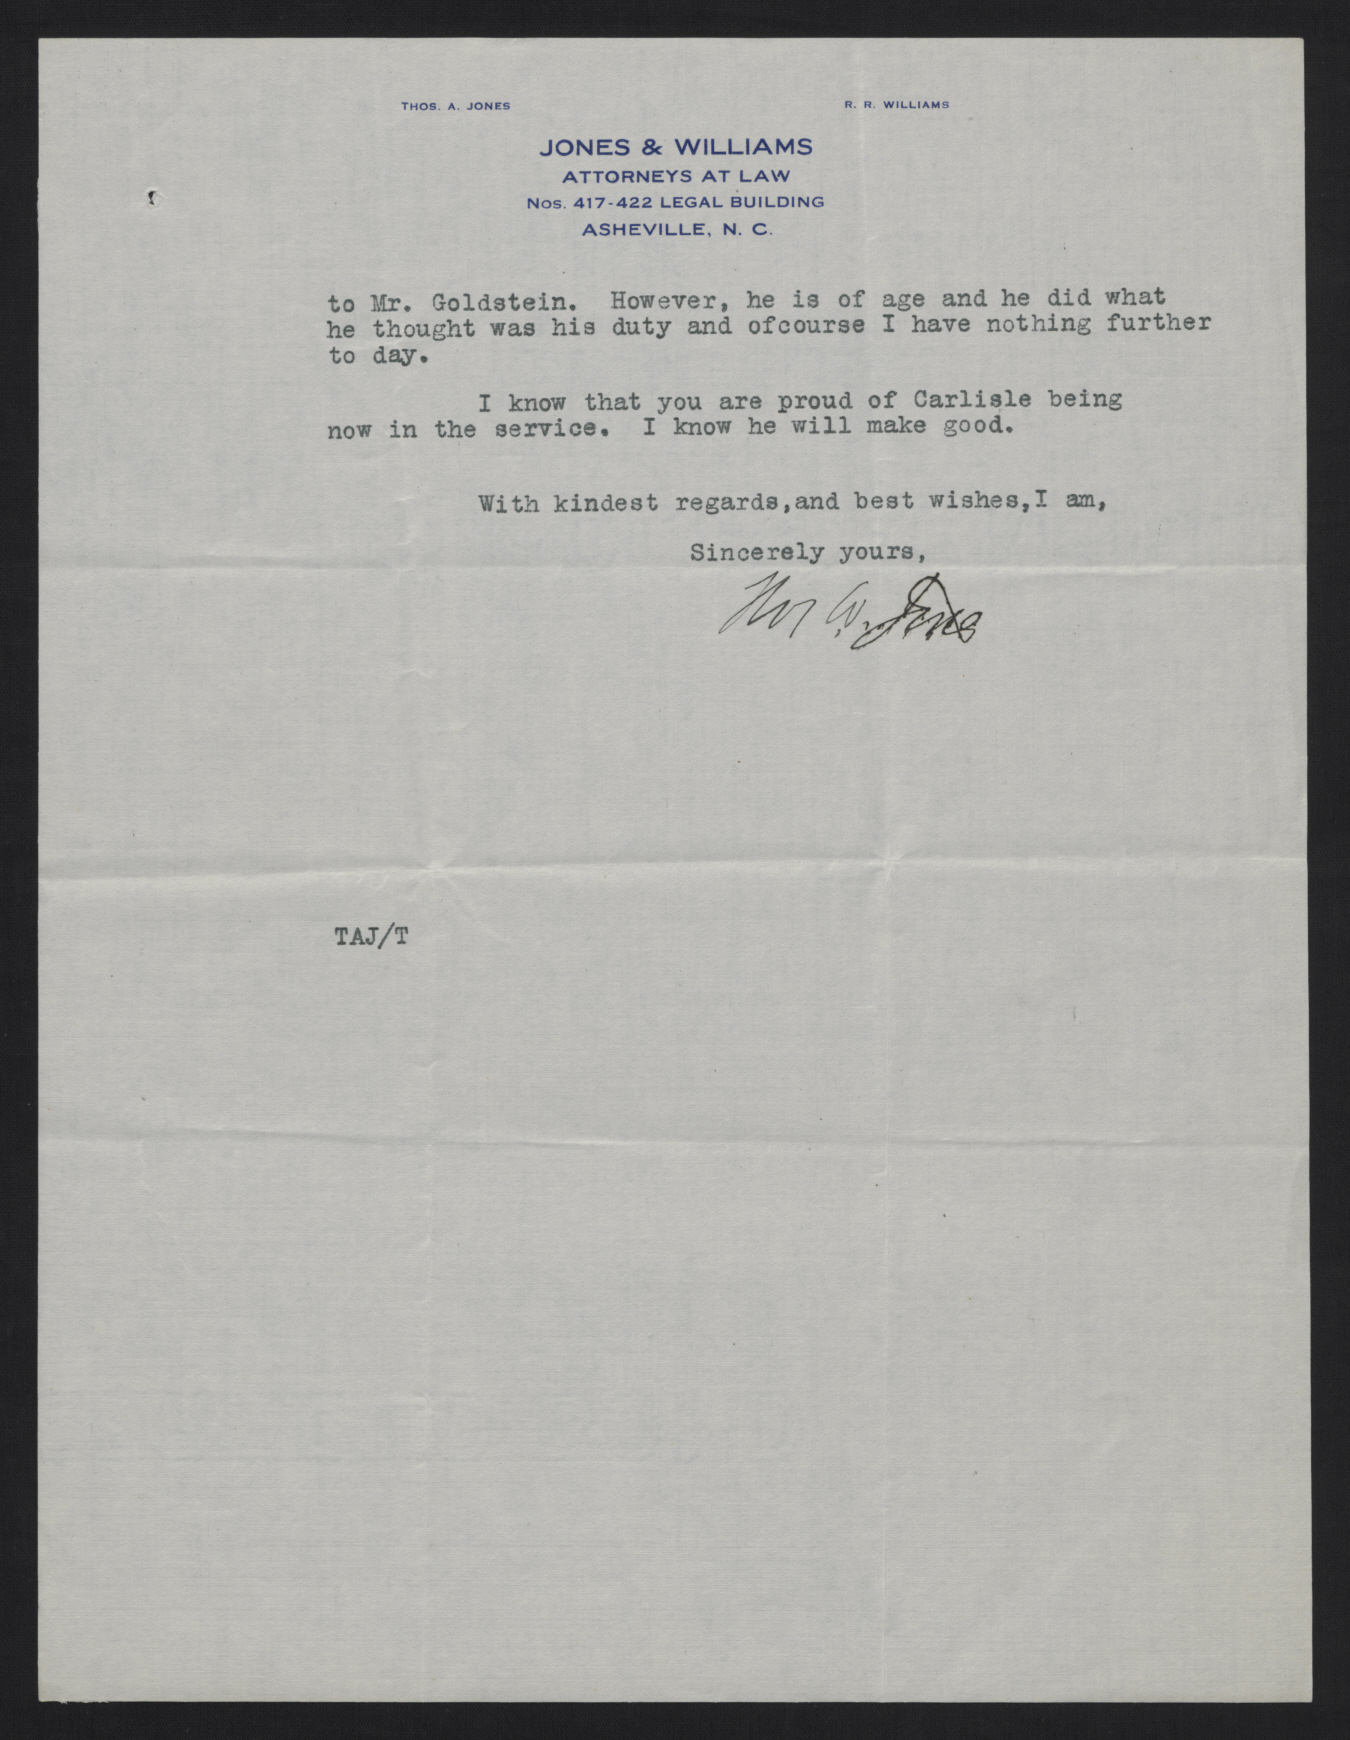 Letter from Jones to Craig, June 29, 1916, page 2